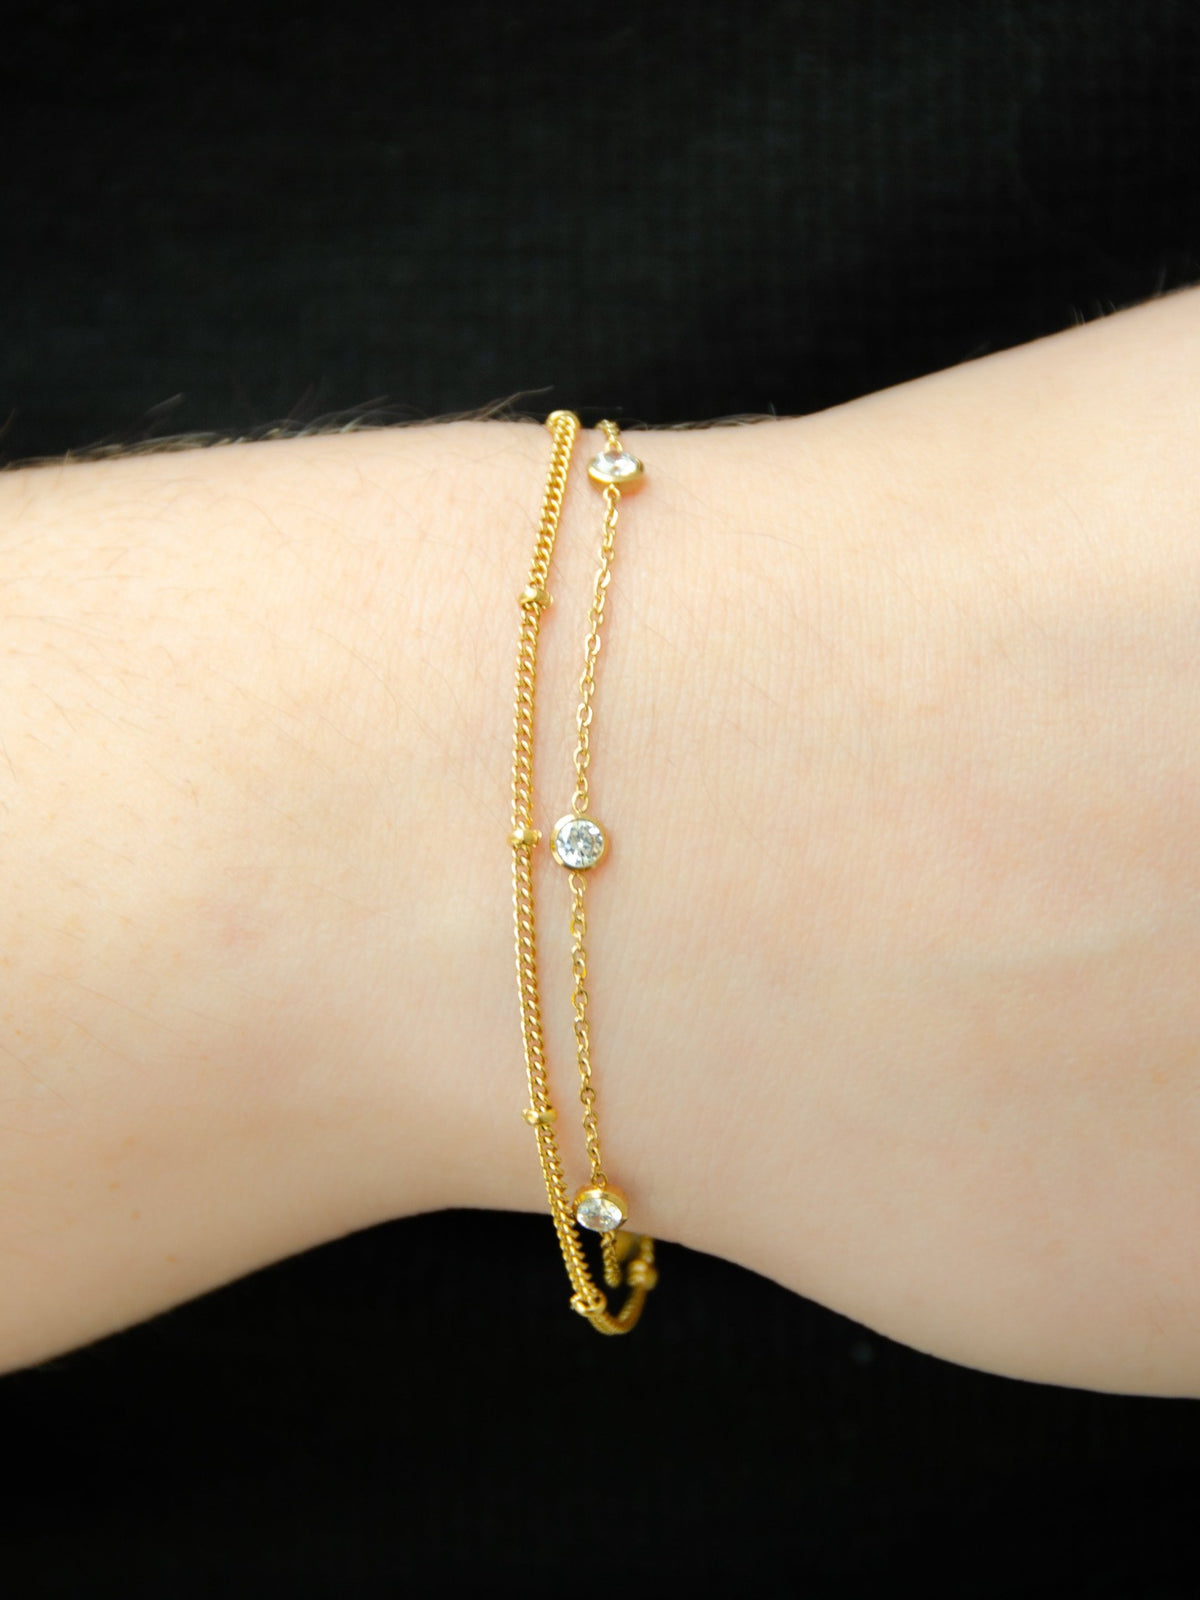 14K gold two layer chain bracelet with crystal charms